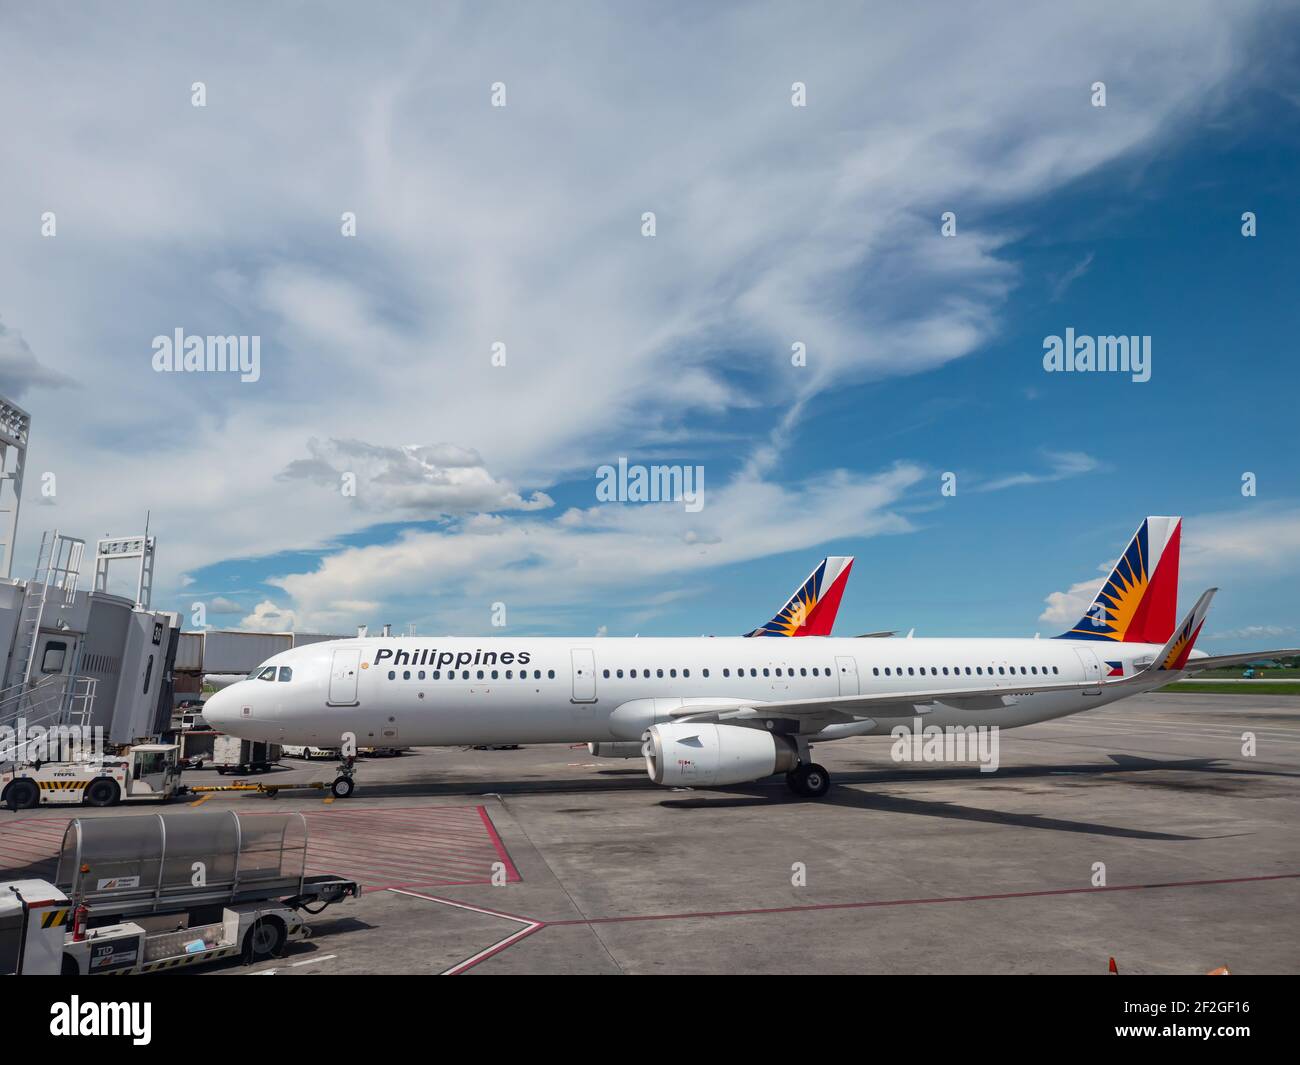 Philippine Airlines Airbus A321ceo at Terminal 2 of Ninoy Aquino International Airport in Manila. Stock Photo